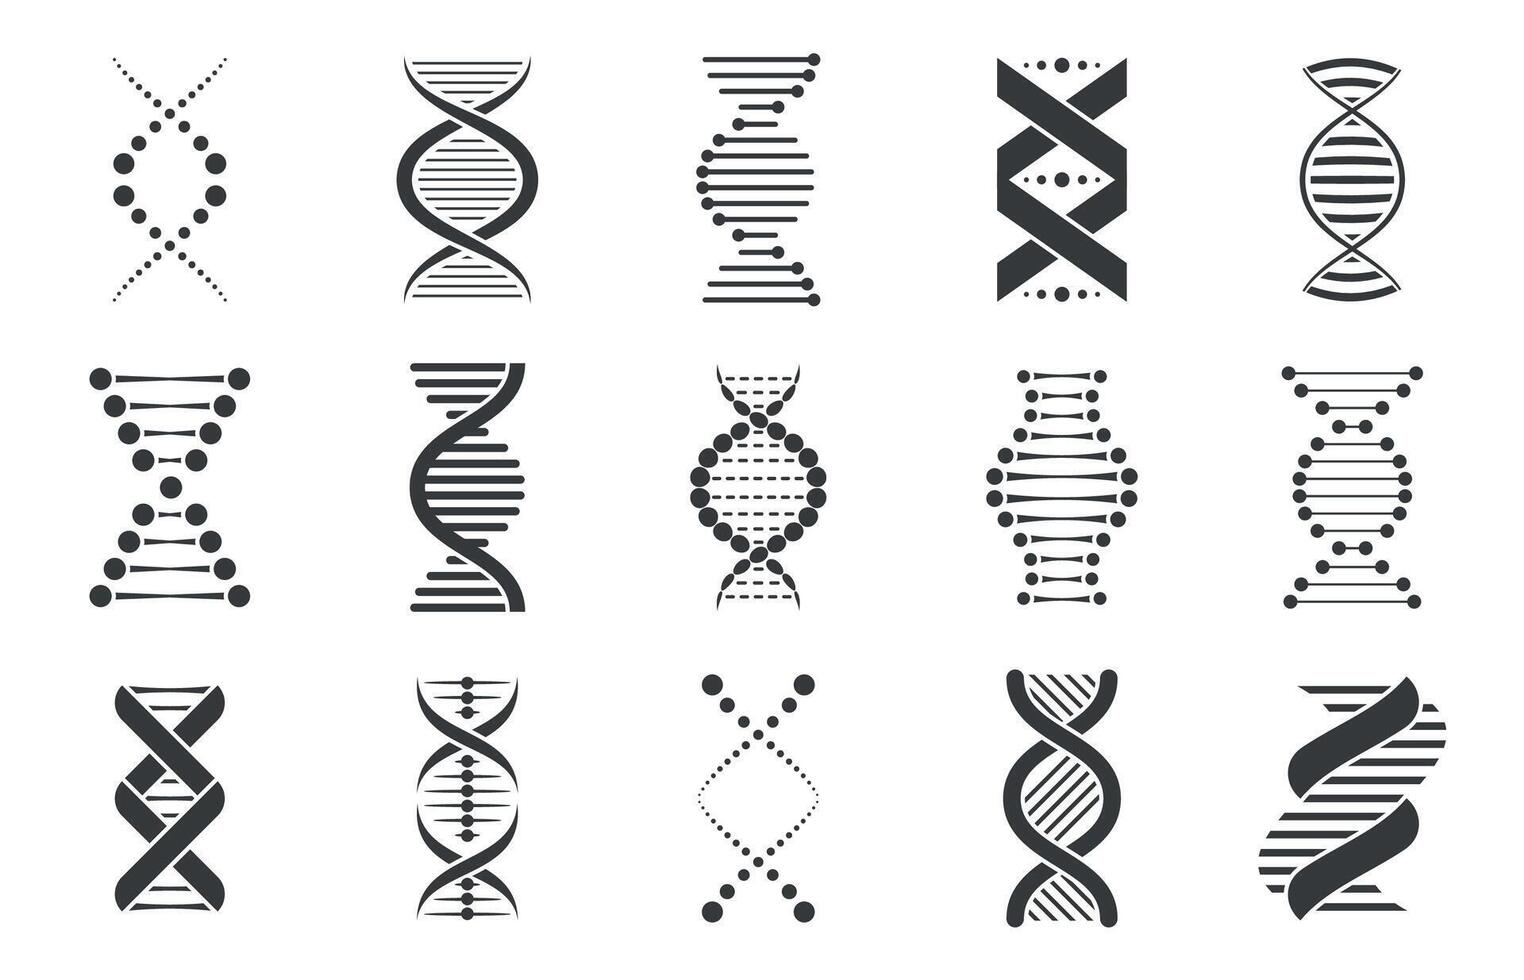 Black dna icons. Biotechnology and molecular biology abstract symbols, spiral genetic molecule sequence code for pharmacy and healthcare. Vector set